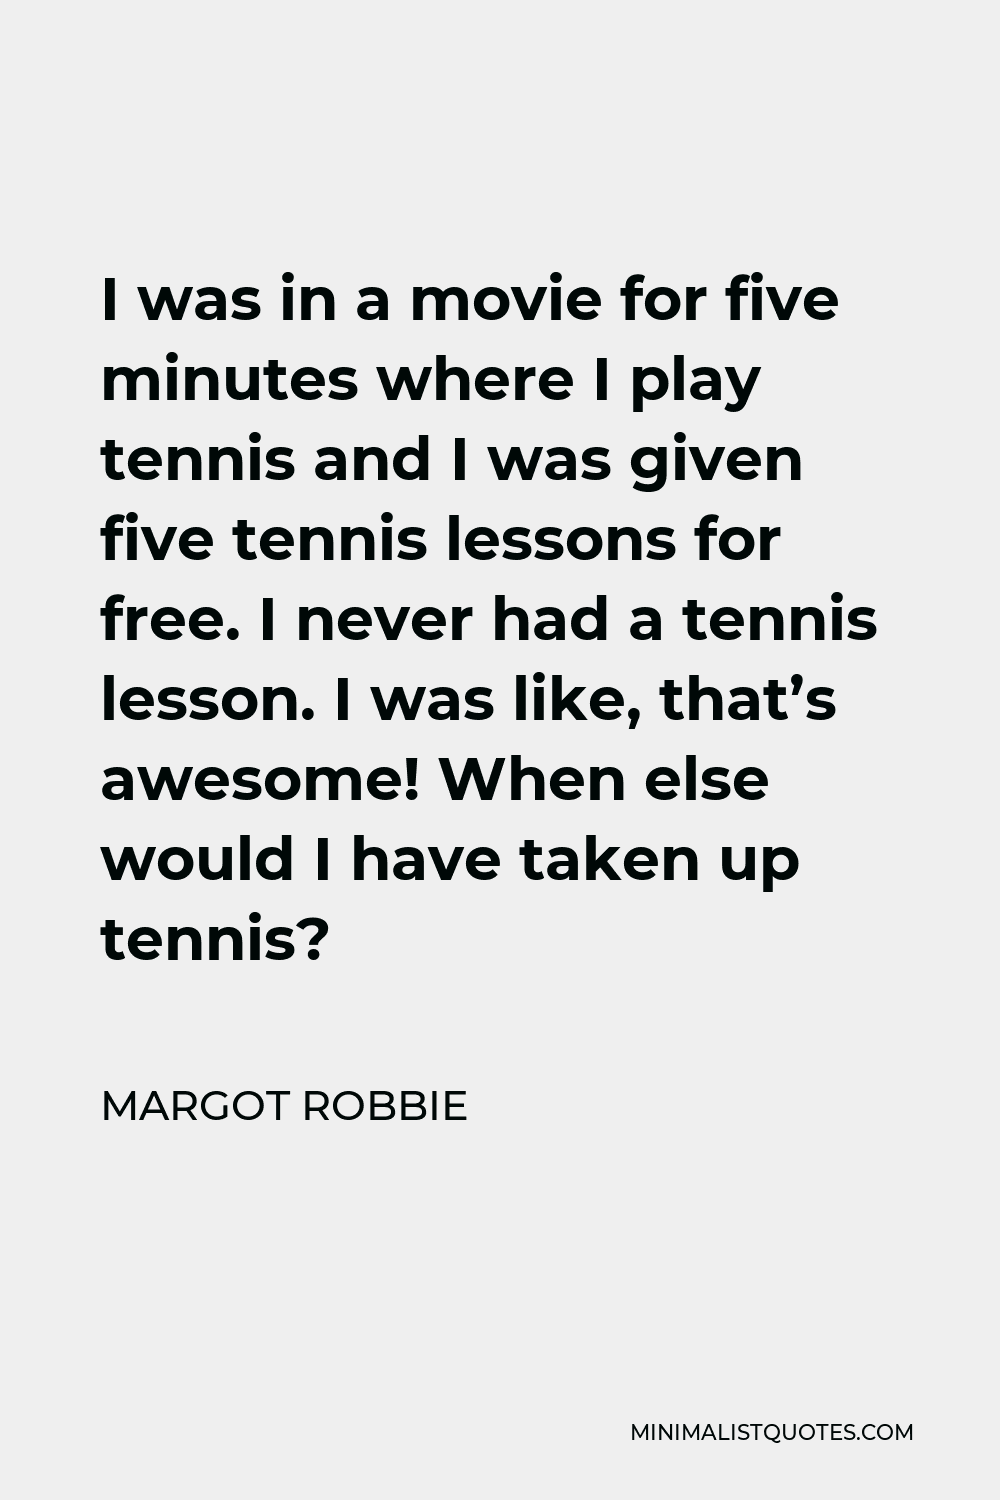 Margot Robbie Quote - I was in a movie for five minutes where I play tennis and I was given five tennis lessons for free. I never had a tennis lesson. I was like, that’s awesome! When else would I have taken up tennis?